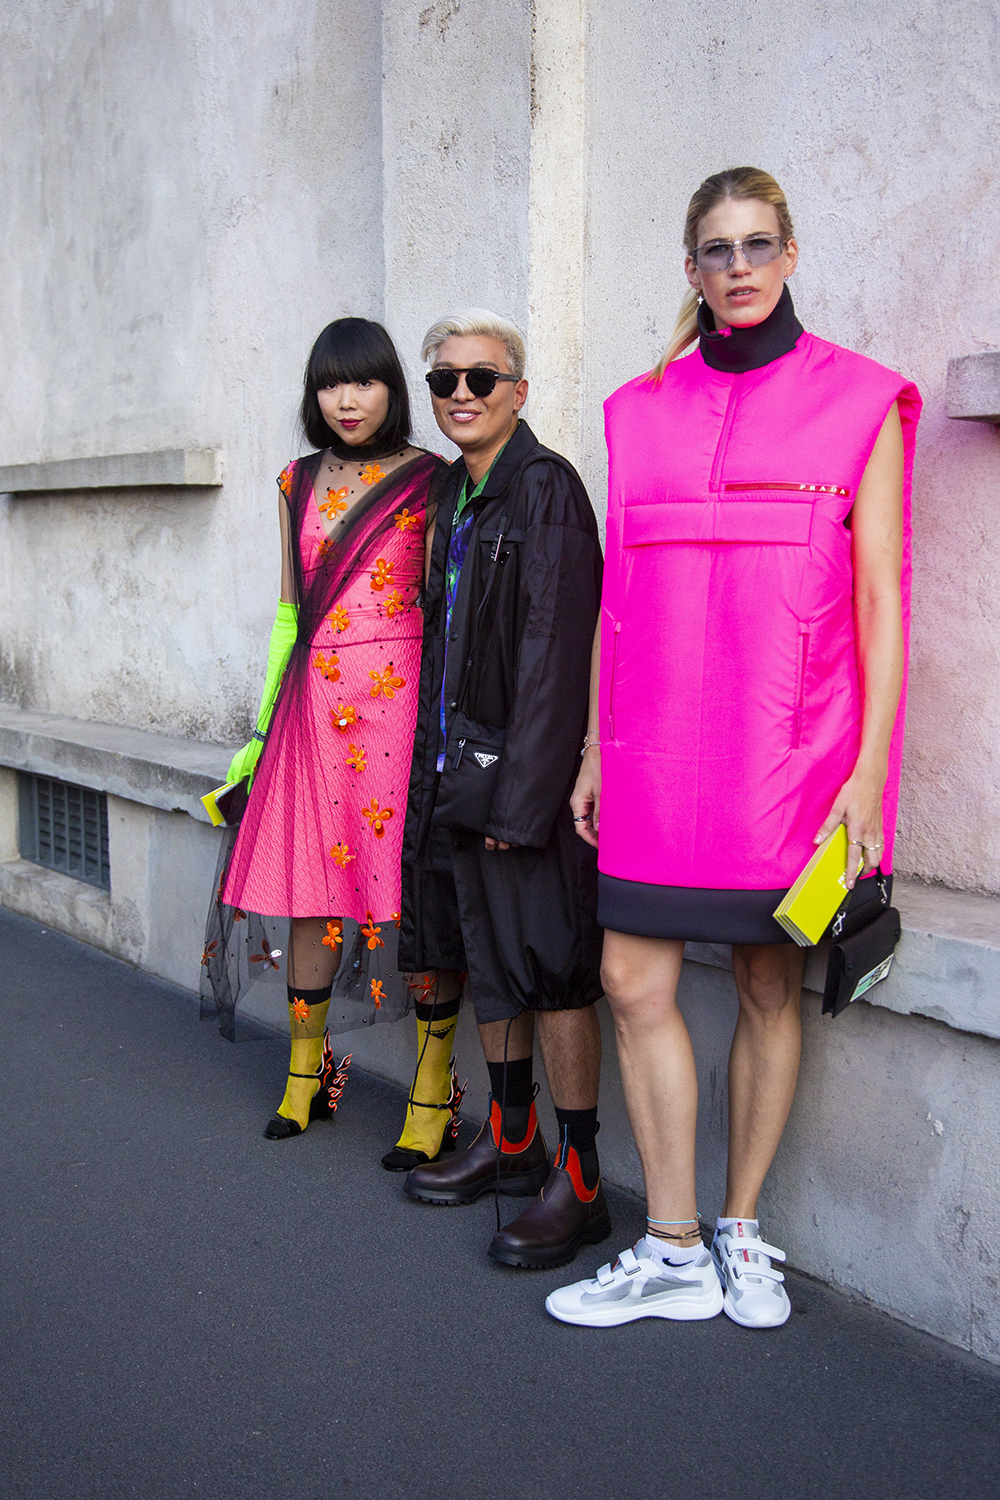 MILAN, ITALY - SEPTEMBER 20: Susanna Lau, wearing a neon fuchsia dress, Bryanboy and Veronika Heilbrunner, wearing a neon fuchsia jacket, are seen in the streets of Milano before the Prada show during Milan Fashion Week Spring/Summer 2019 on September 20, 2018 in Milan, Italy. (Photo by Claudio Lavenia/Getty Images)